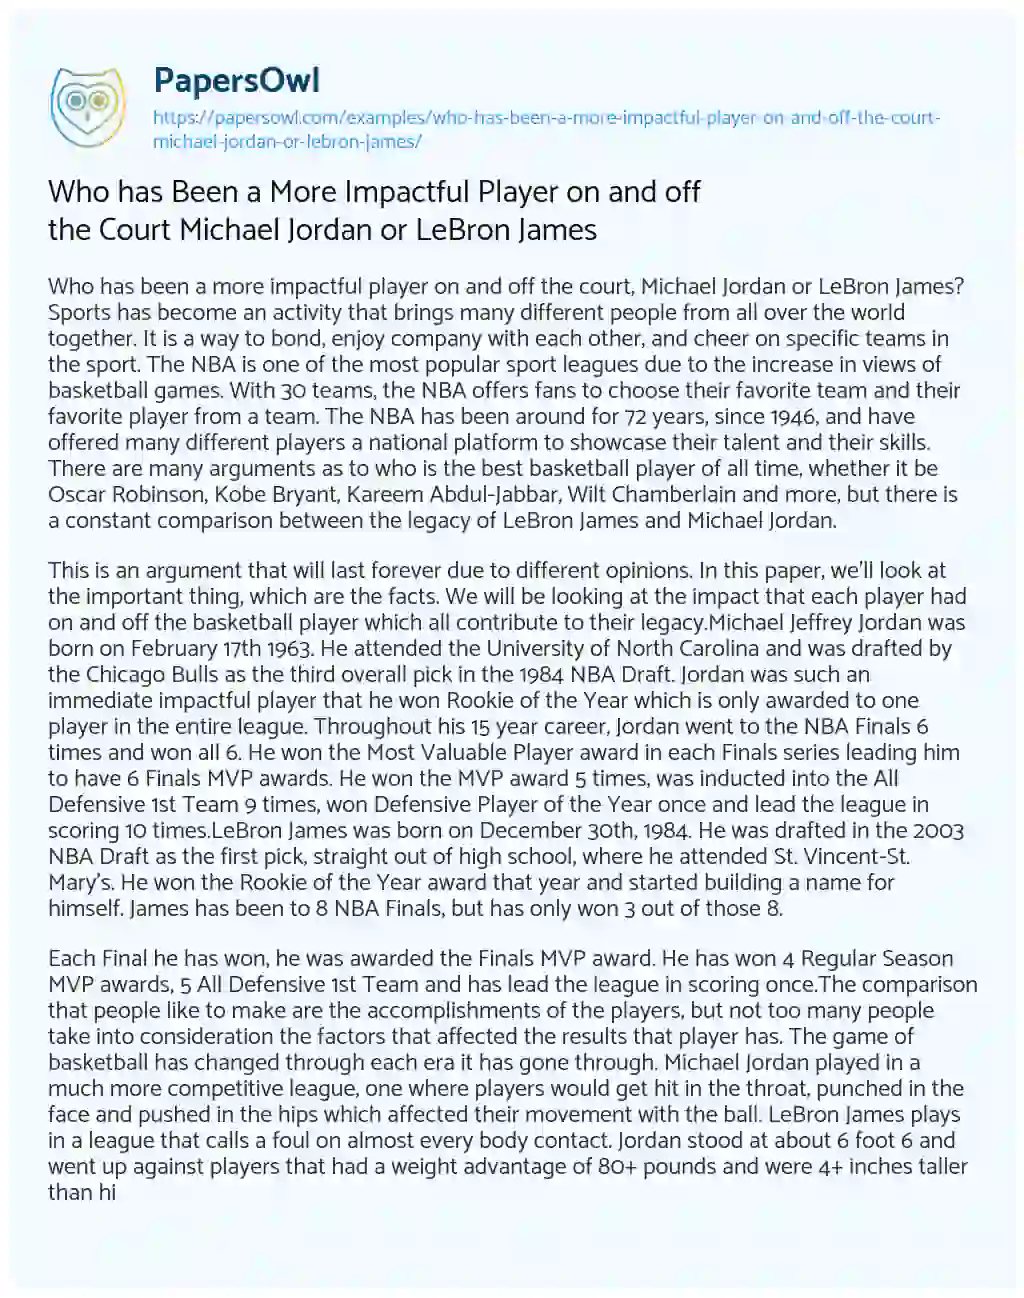 Essay on Who has been a more Impactful Player on and off the Court Michael Jordan or LeBron James